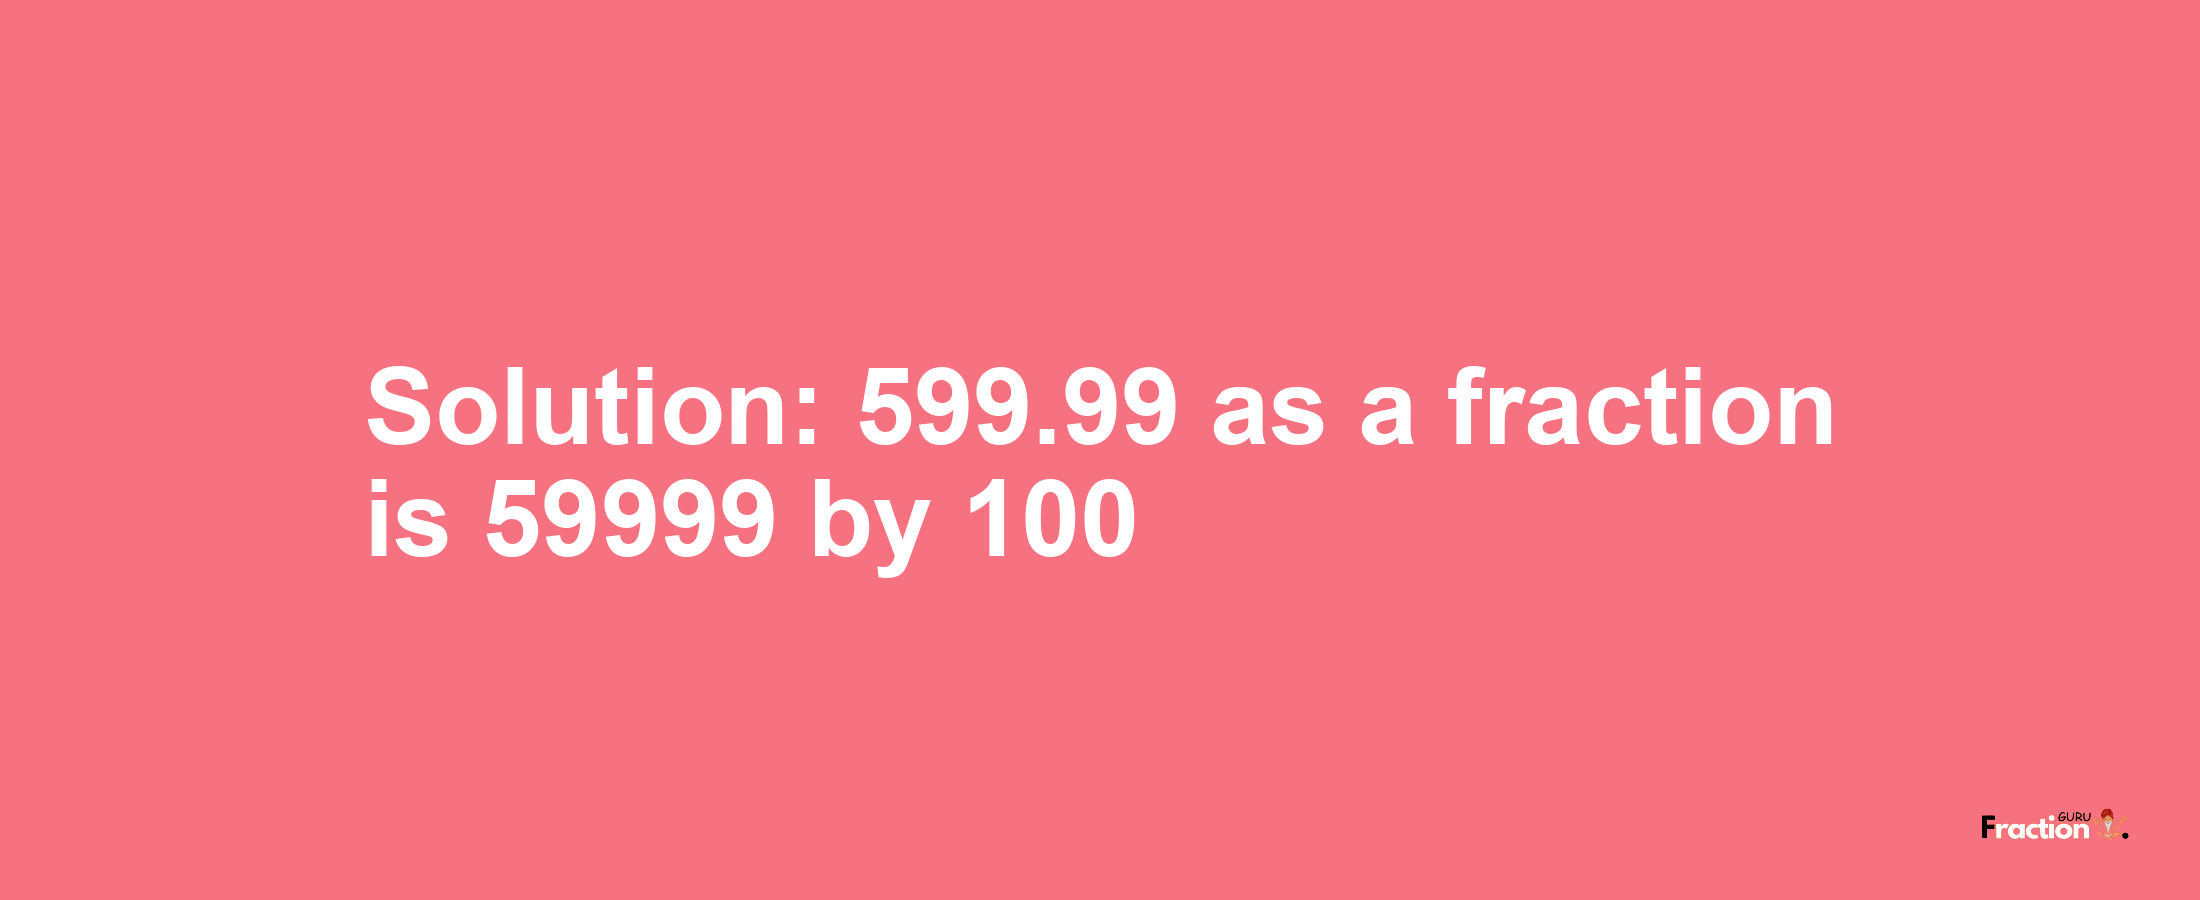 Solution:599.99 as a fraction is 59999/100